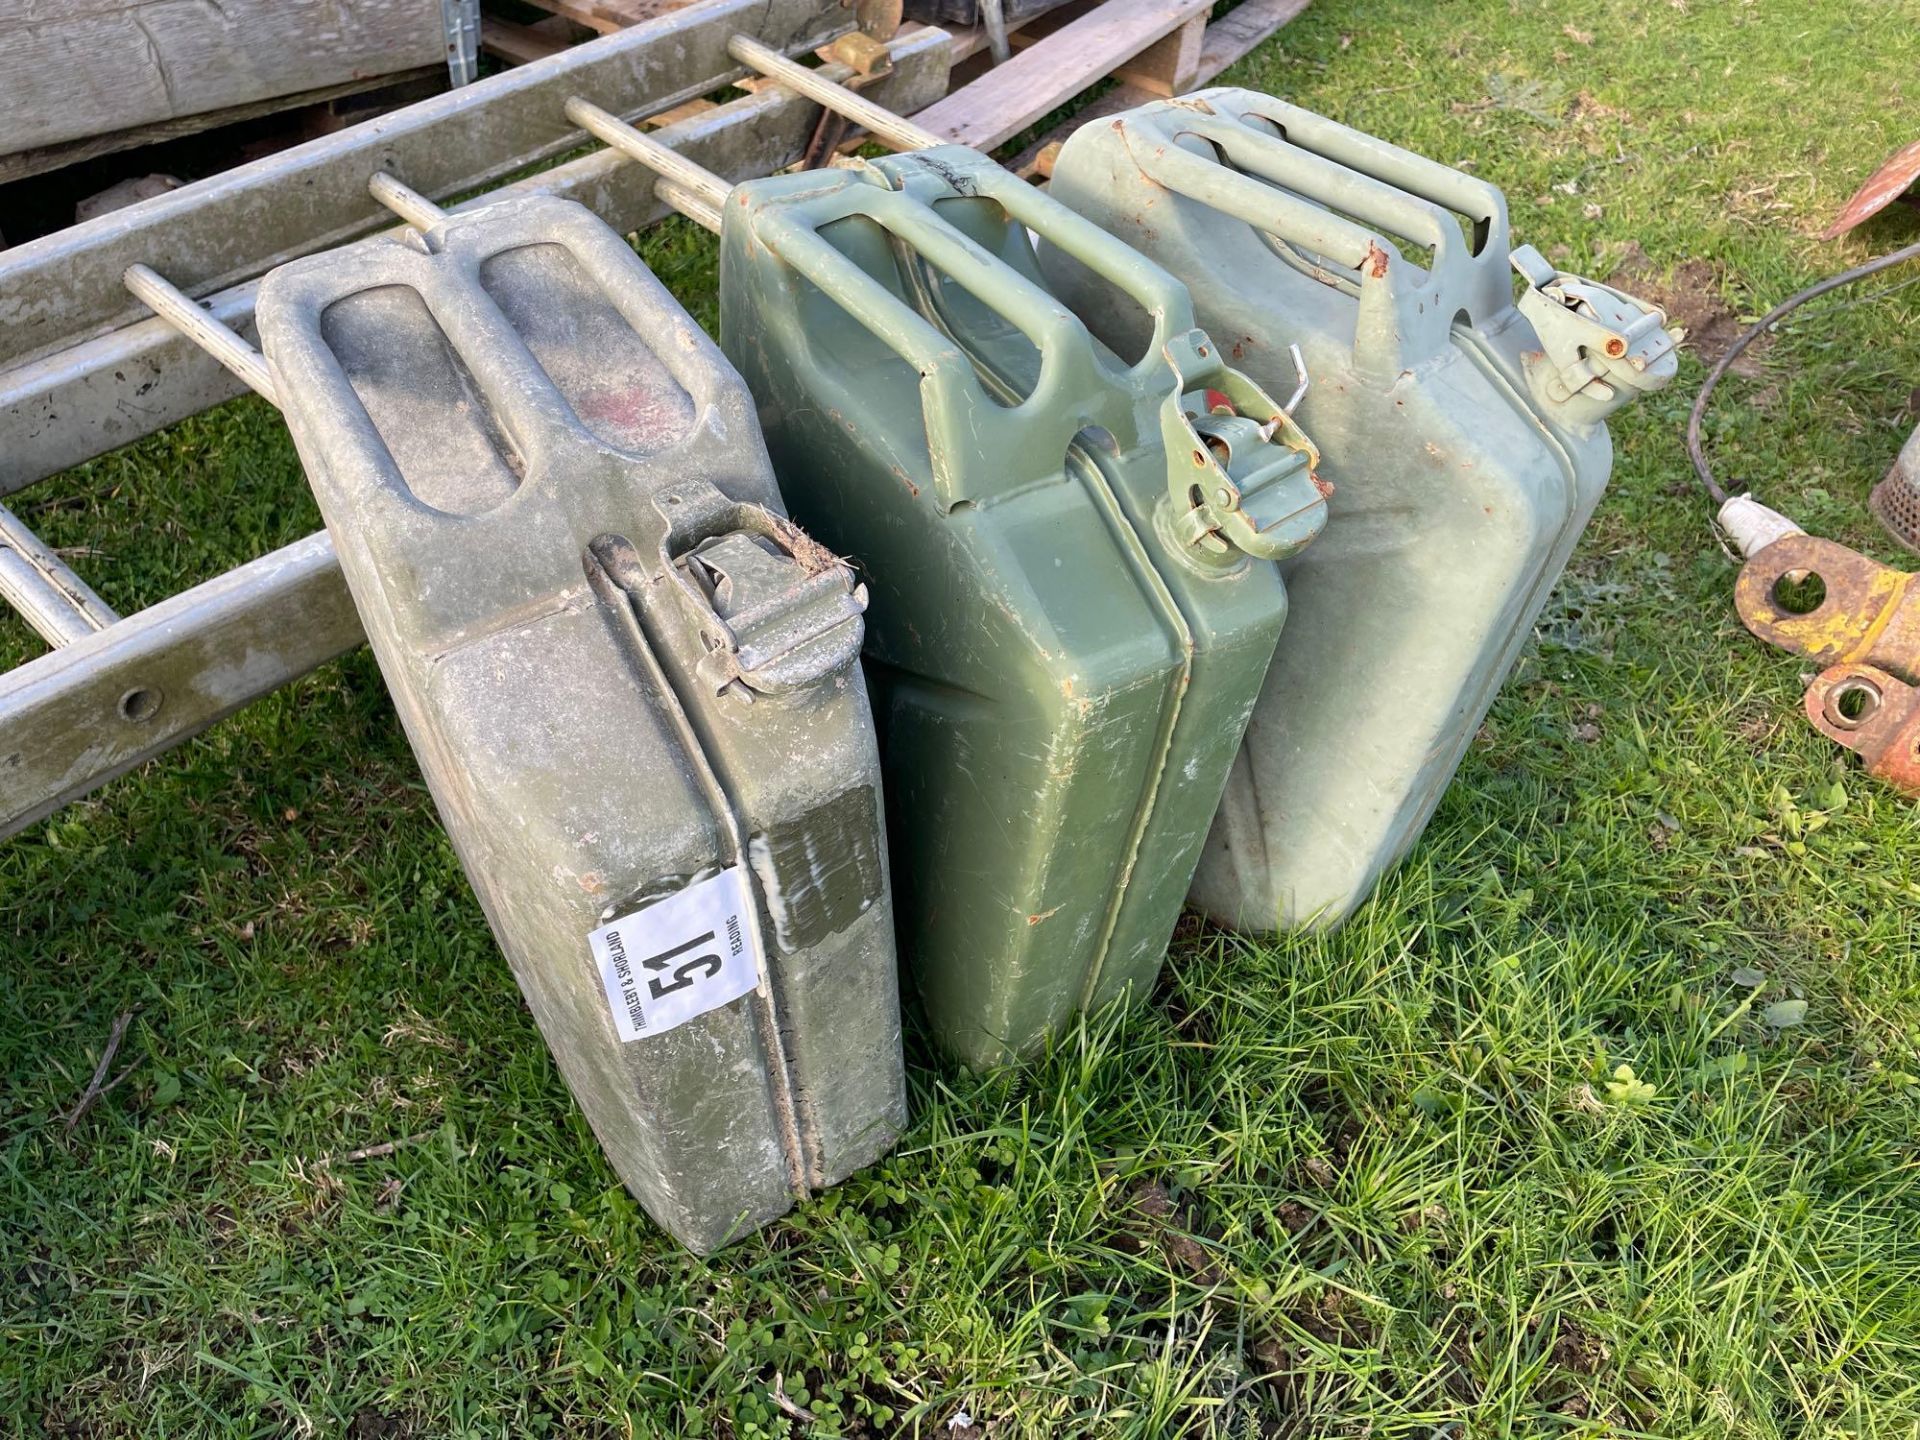 3 jerry cans